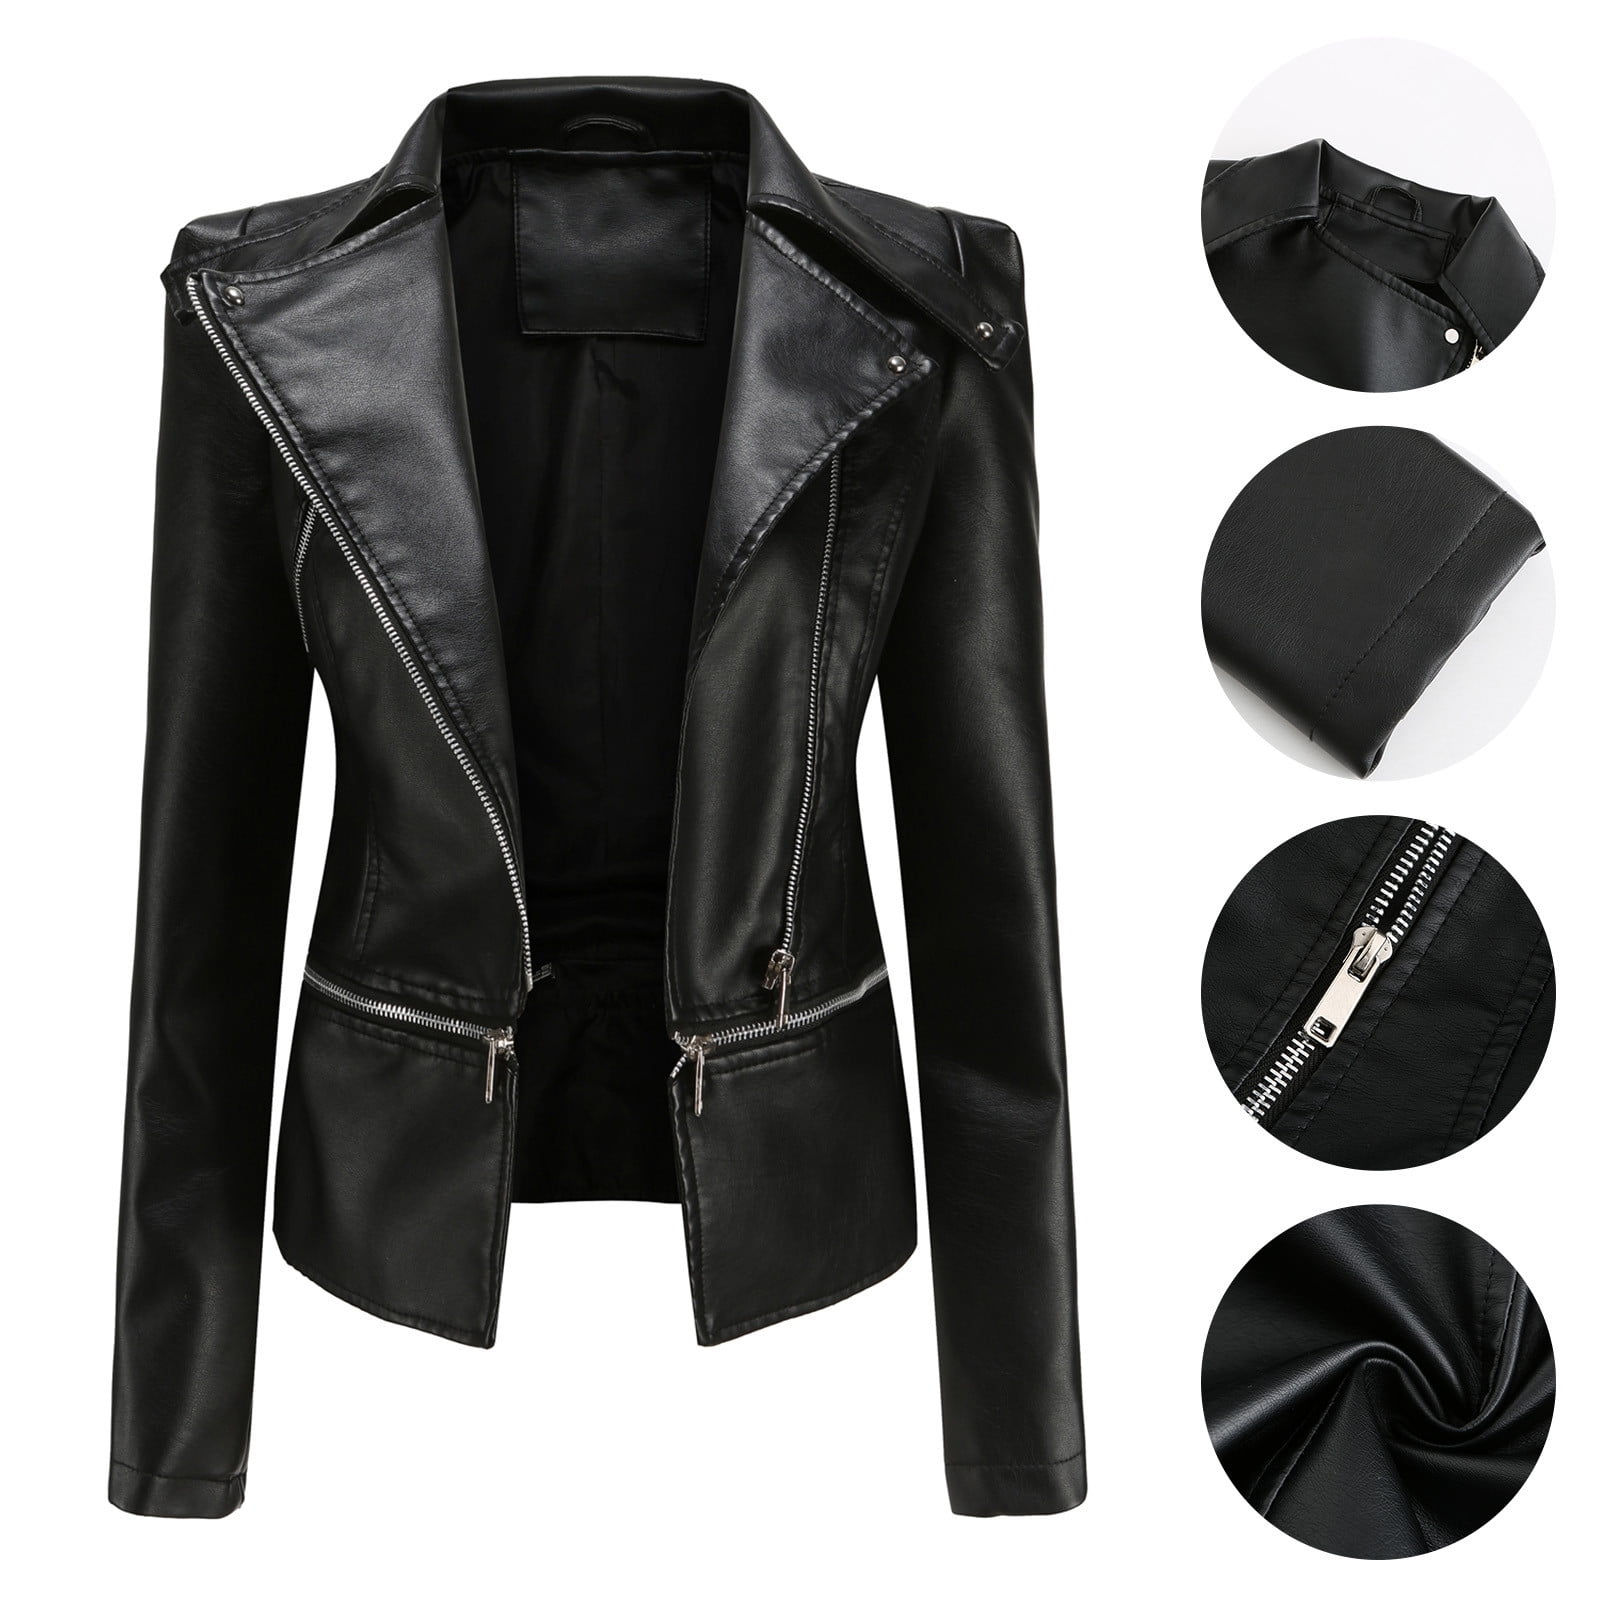 Wefuesd Women Cool Faux Leather Jacket Long Sleeve Zipper Fitted Coat ...